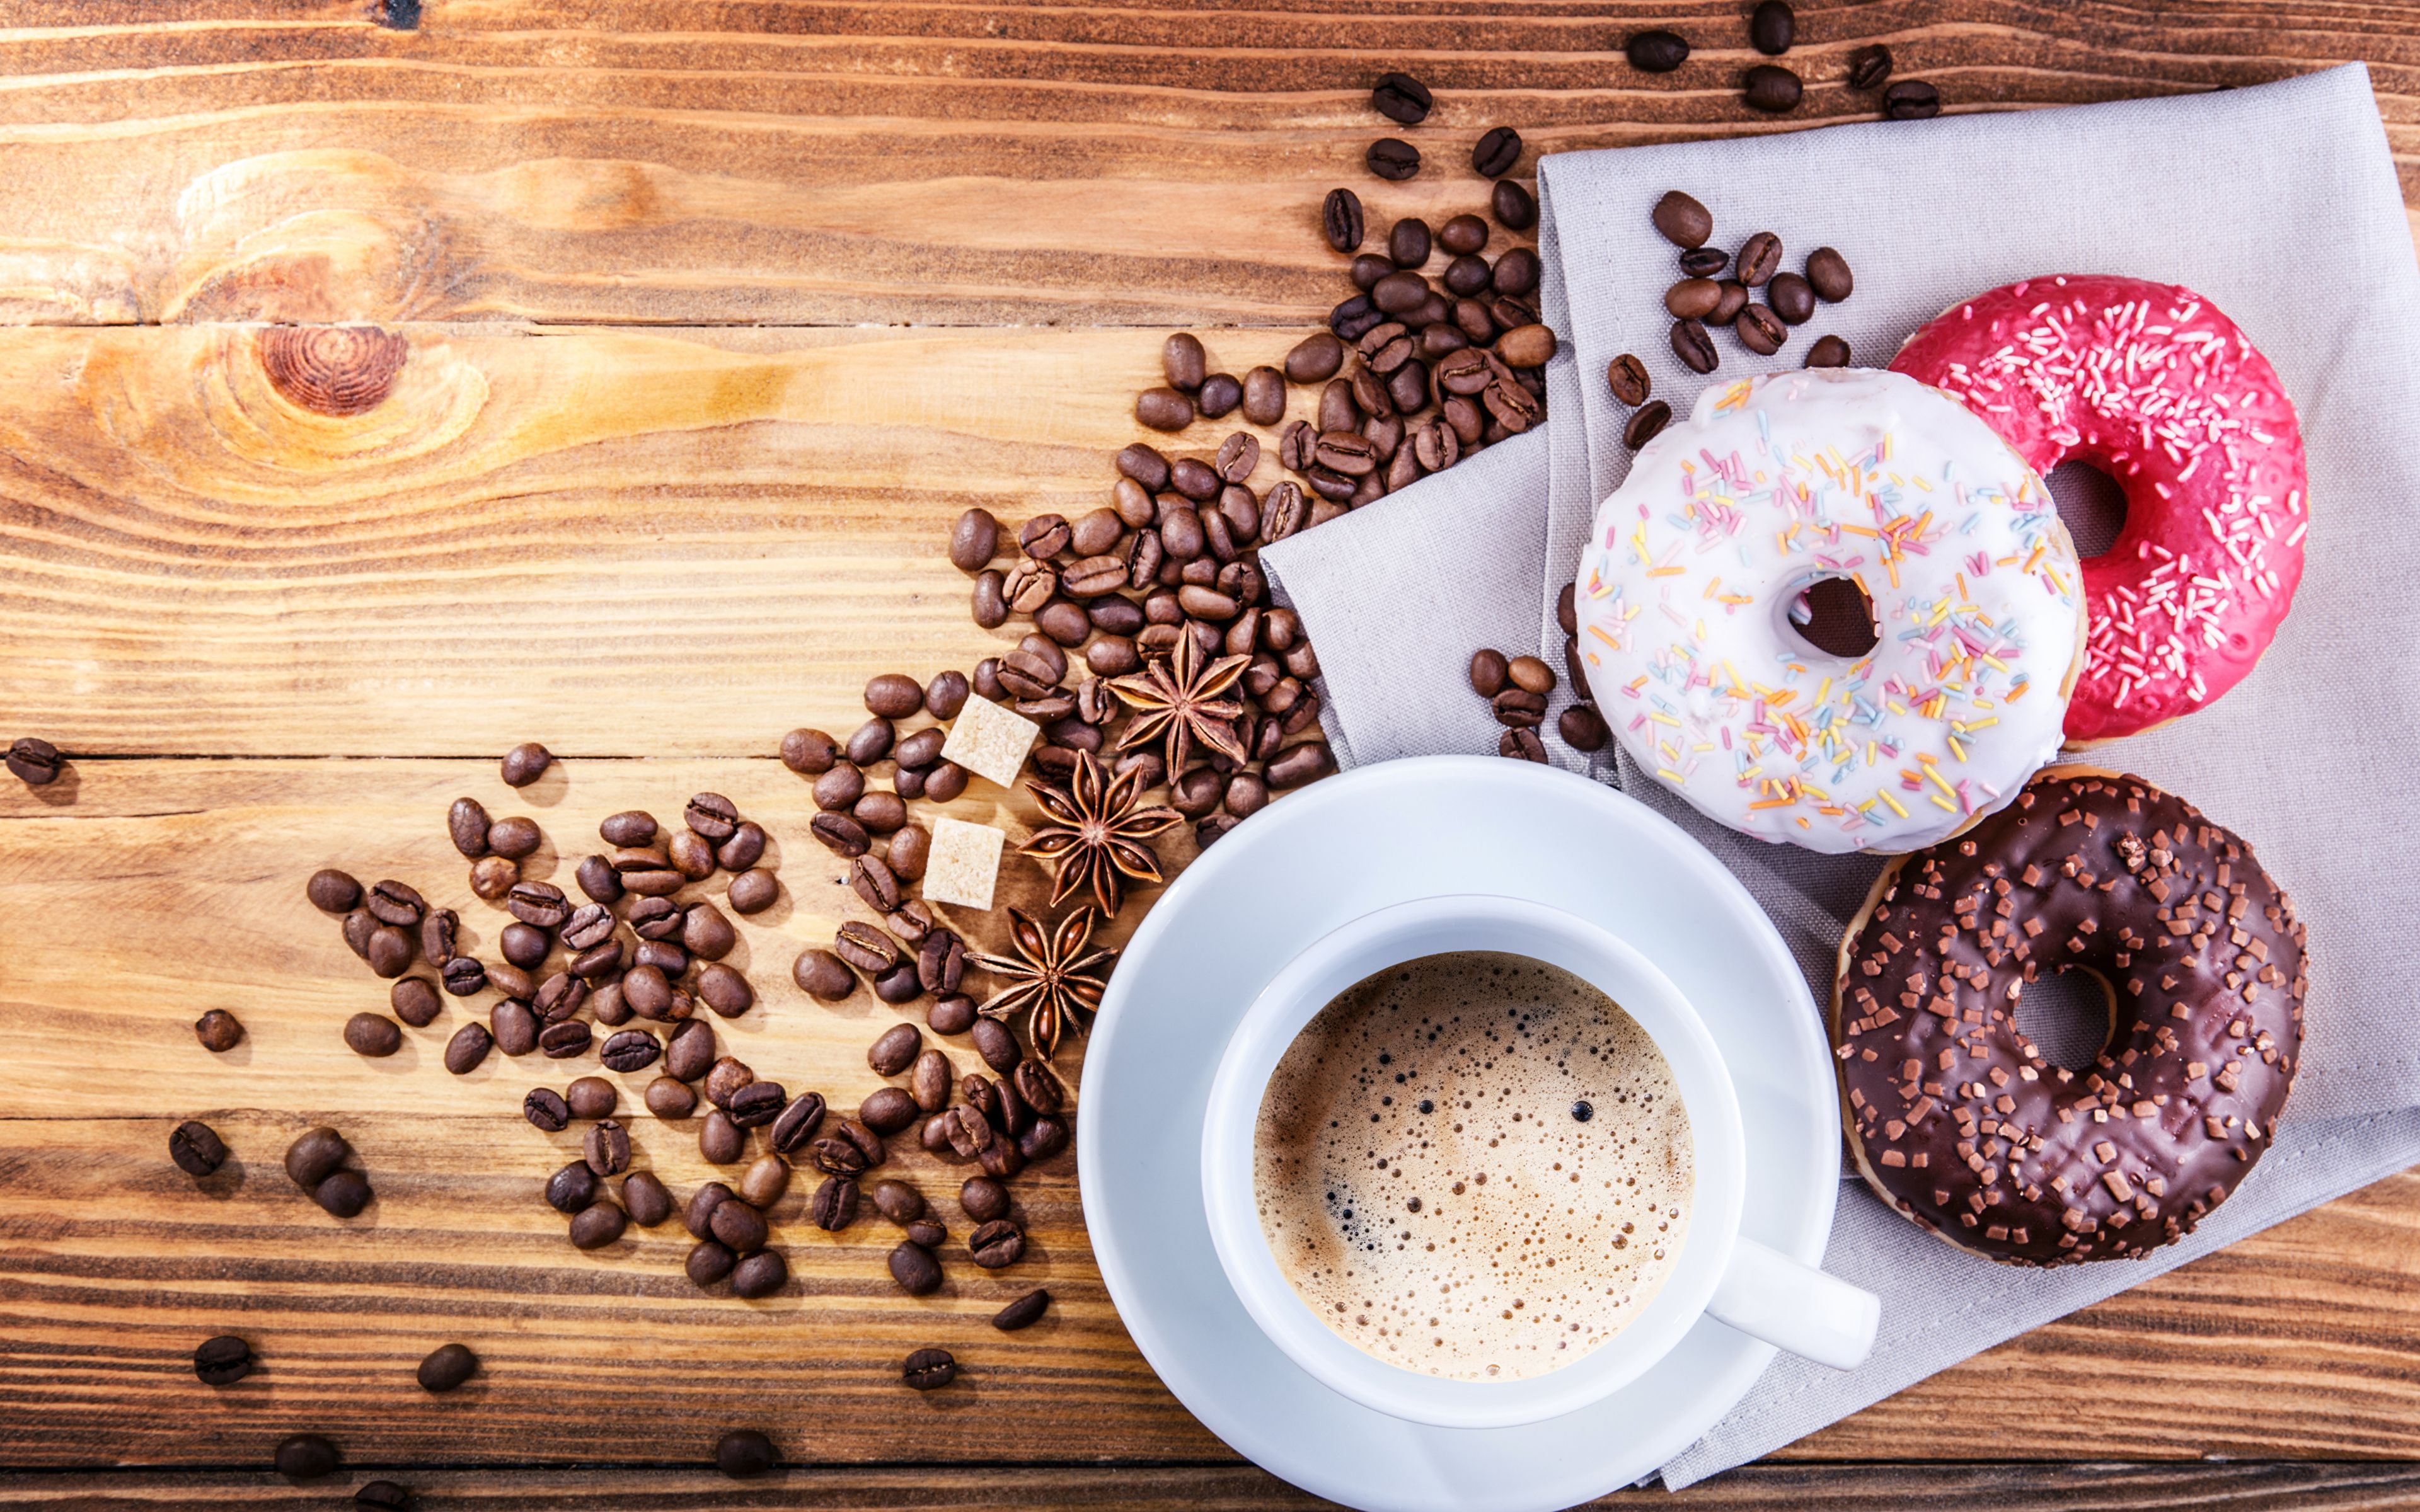 Coffee and Donut Wallpaper Free Coffee and Donut